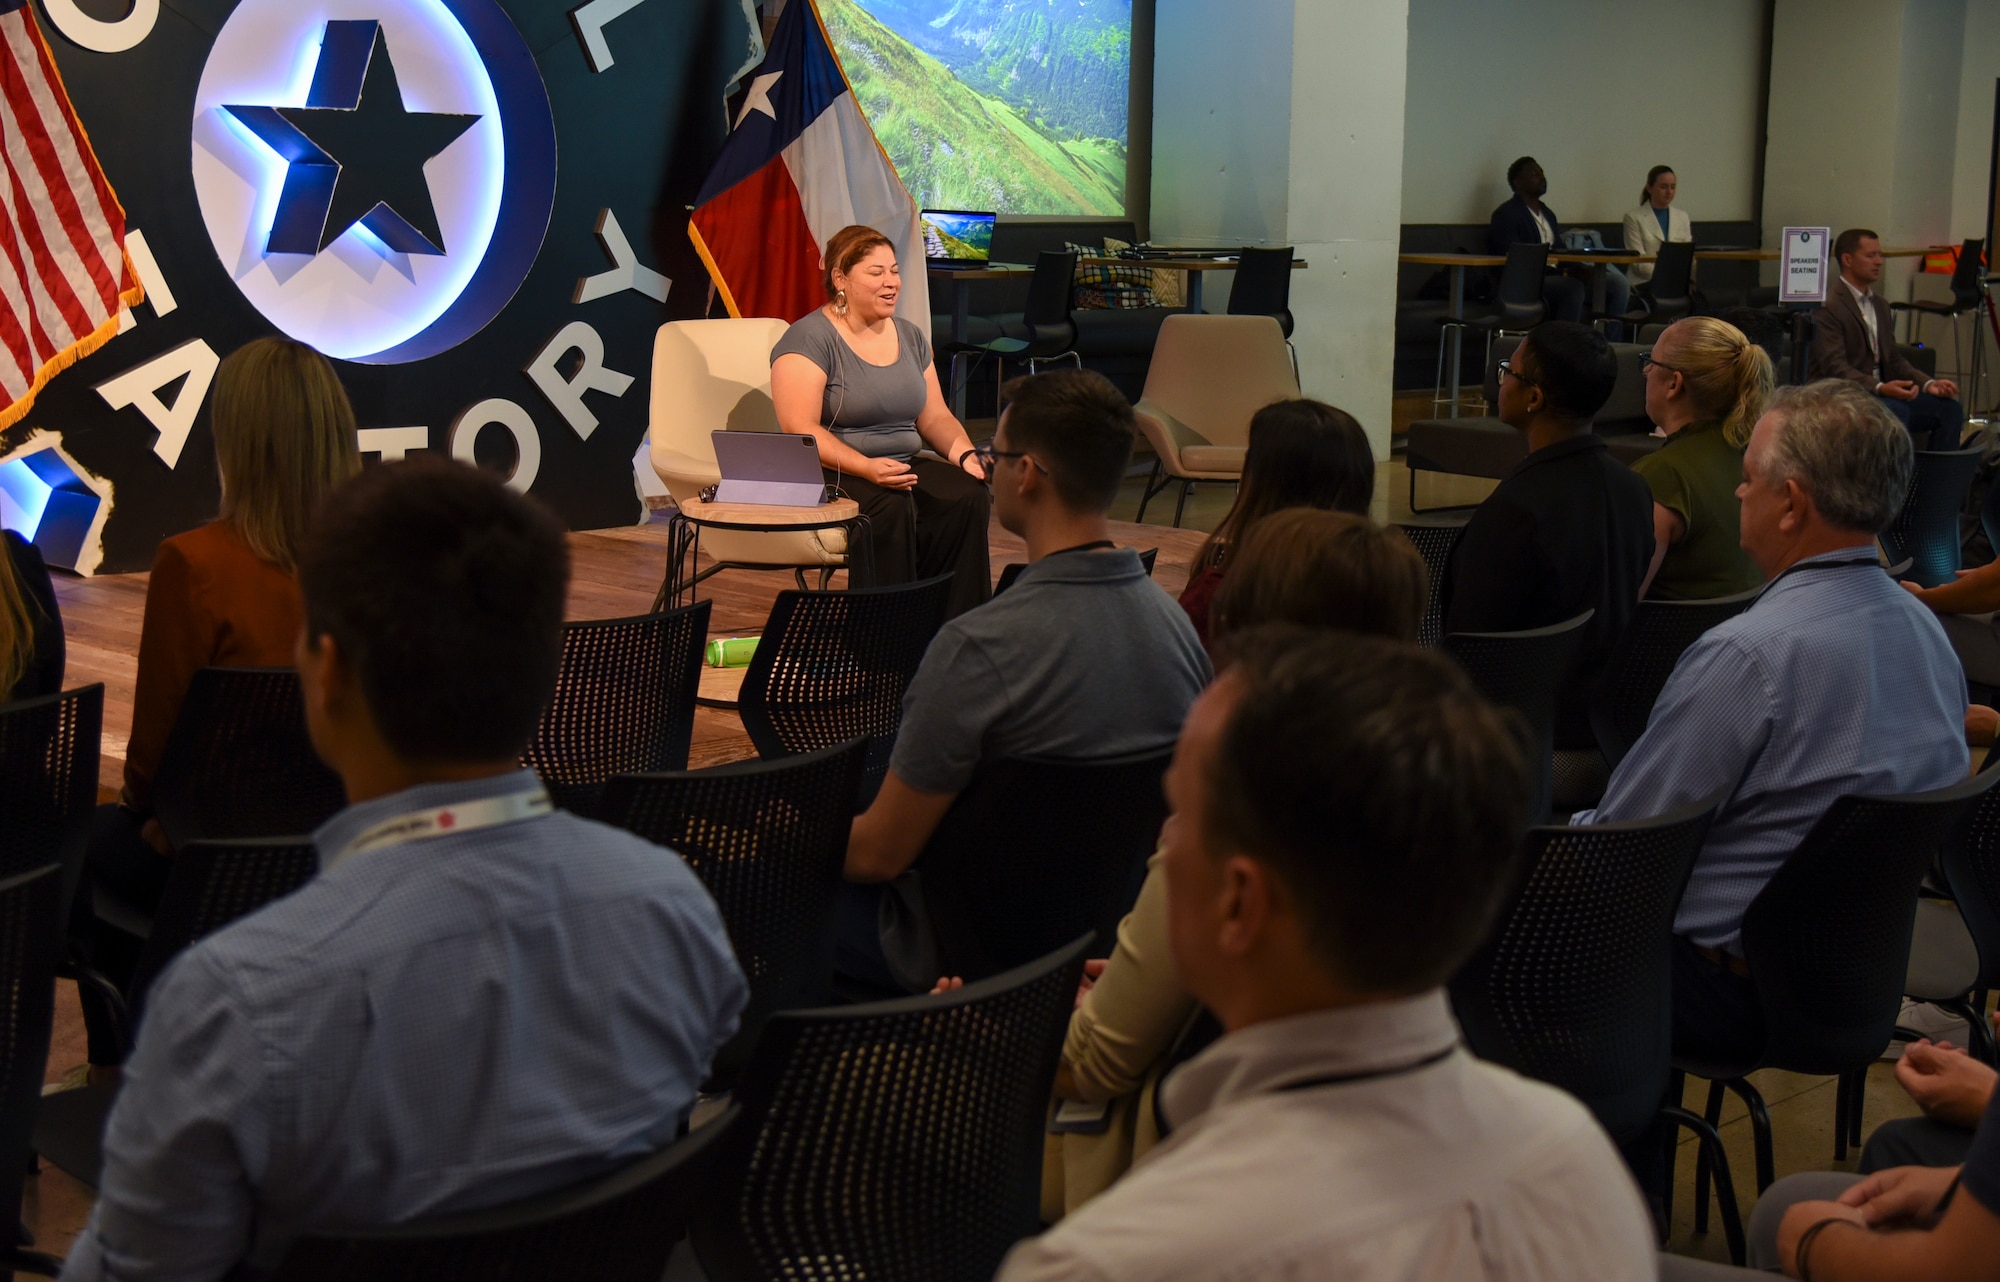 AFWERX kicks off Fed Supernova with 22 minutes of wellness at Capital Factory in Austin, Texas, Aug. 23, 2023. AFWERX invited Maribel Gabriel Valls, a meditation teacher, to lead a morning mindfulness session to create a lasting habit of self-care and improve long-term well-being. Col. Elliott Leigh, AFWERX director and chief commercialization officer for the Department of the Air Force, encourages everyone to take 22 minutes each day to focus on something that brings joy in their life. (U.S. Air Force photo by Matthew Clouse)